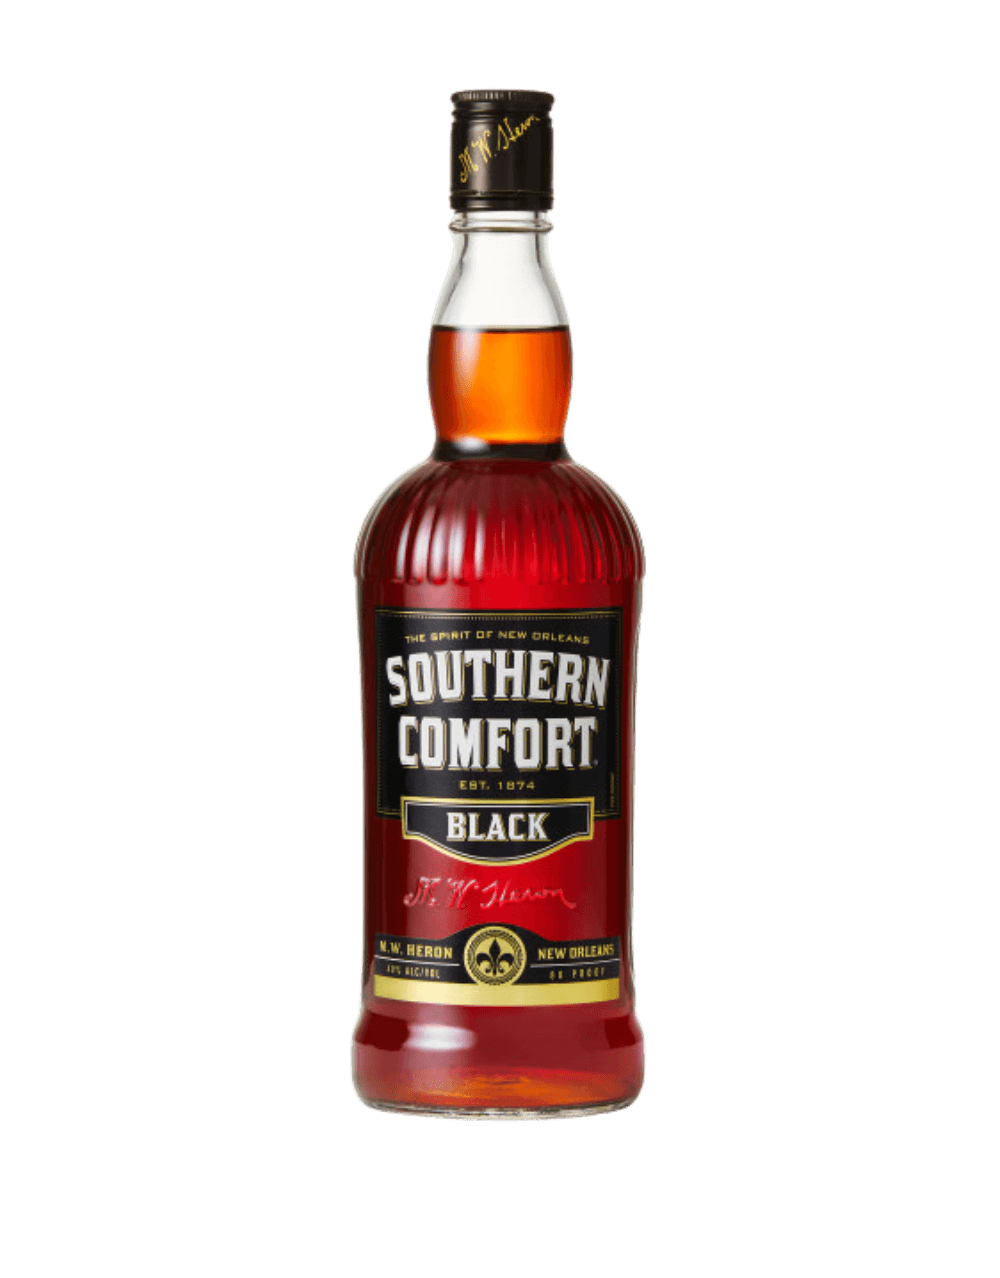 Southern Comfort Black Whiskey